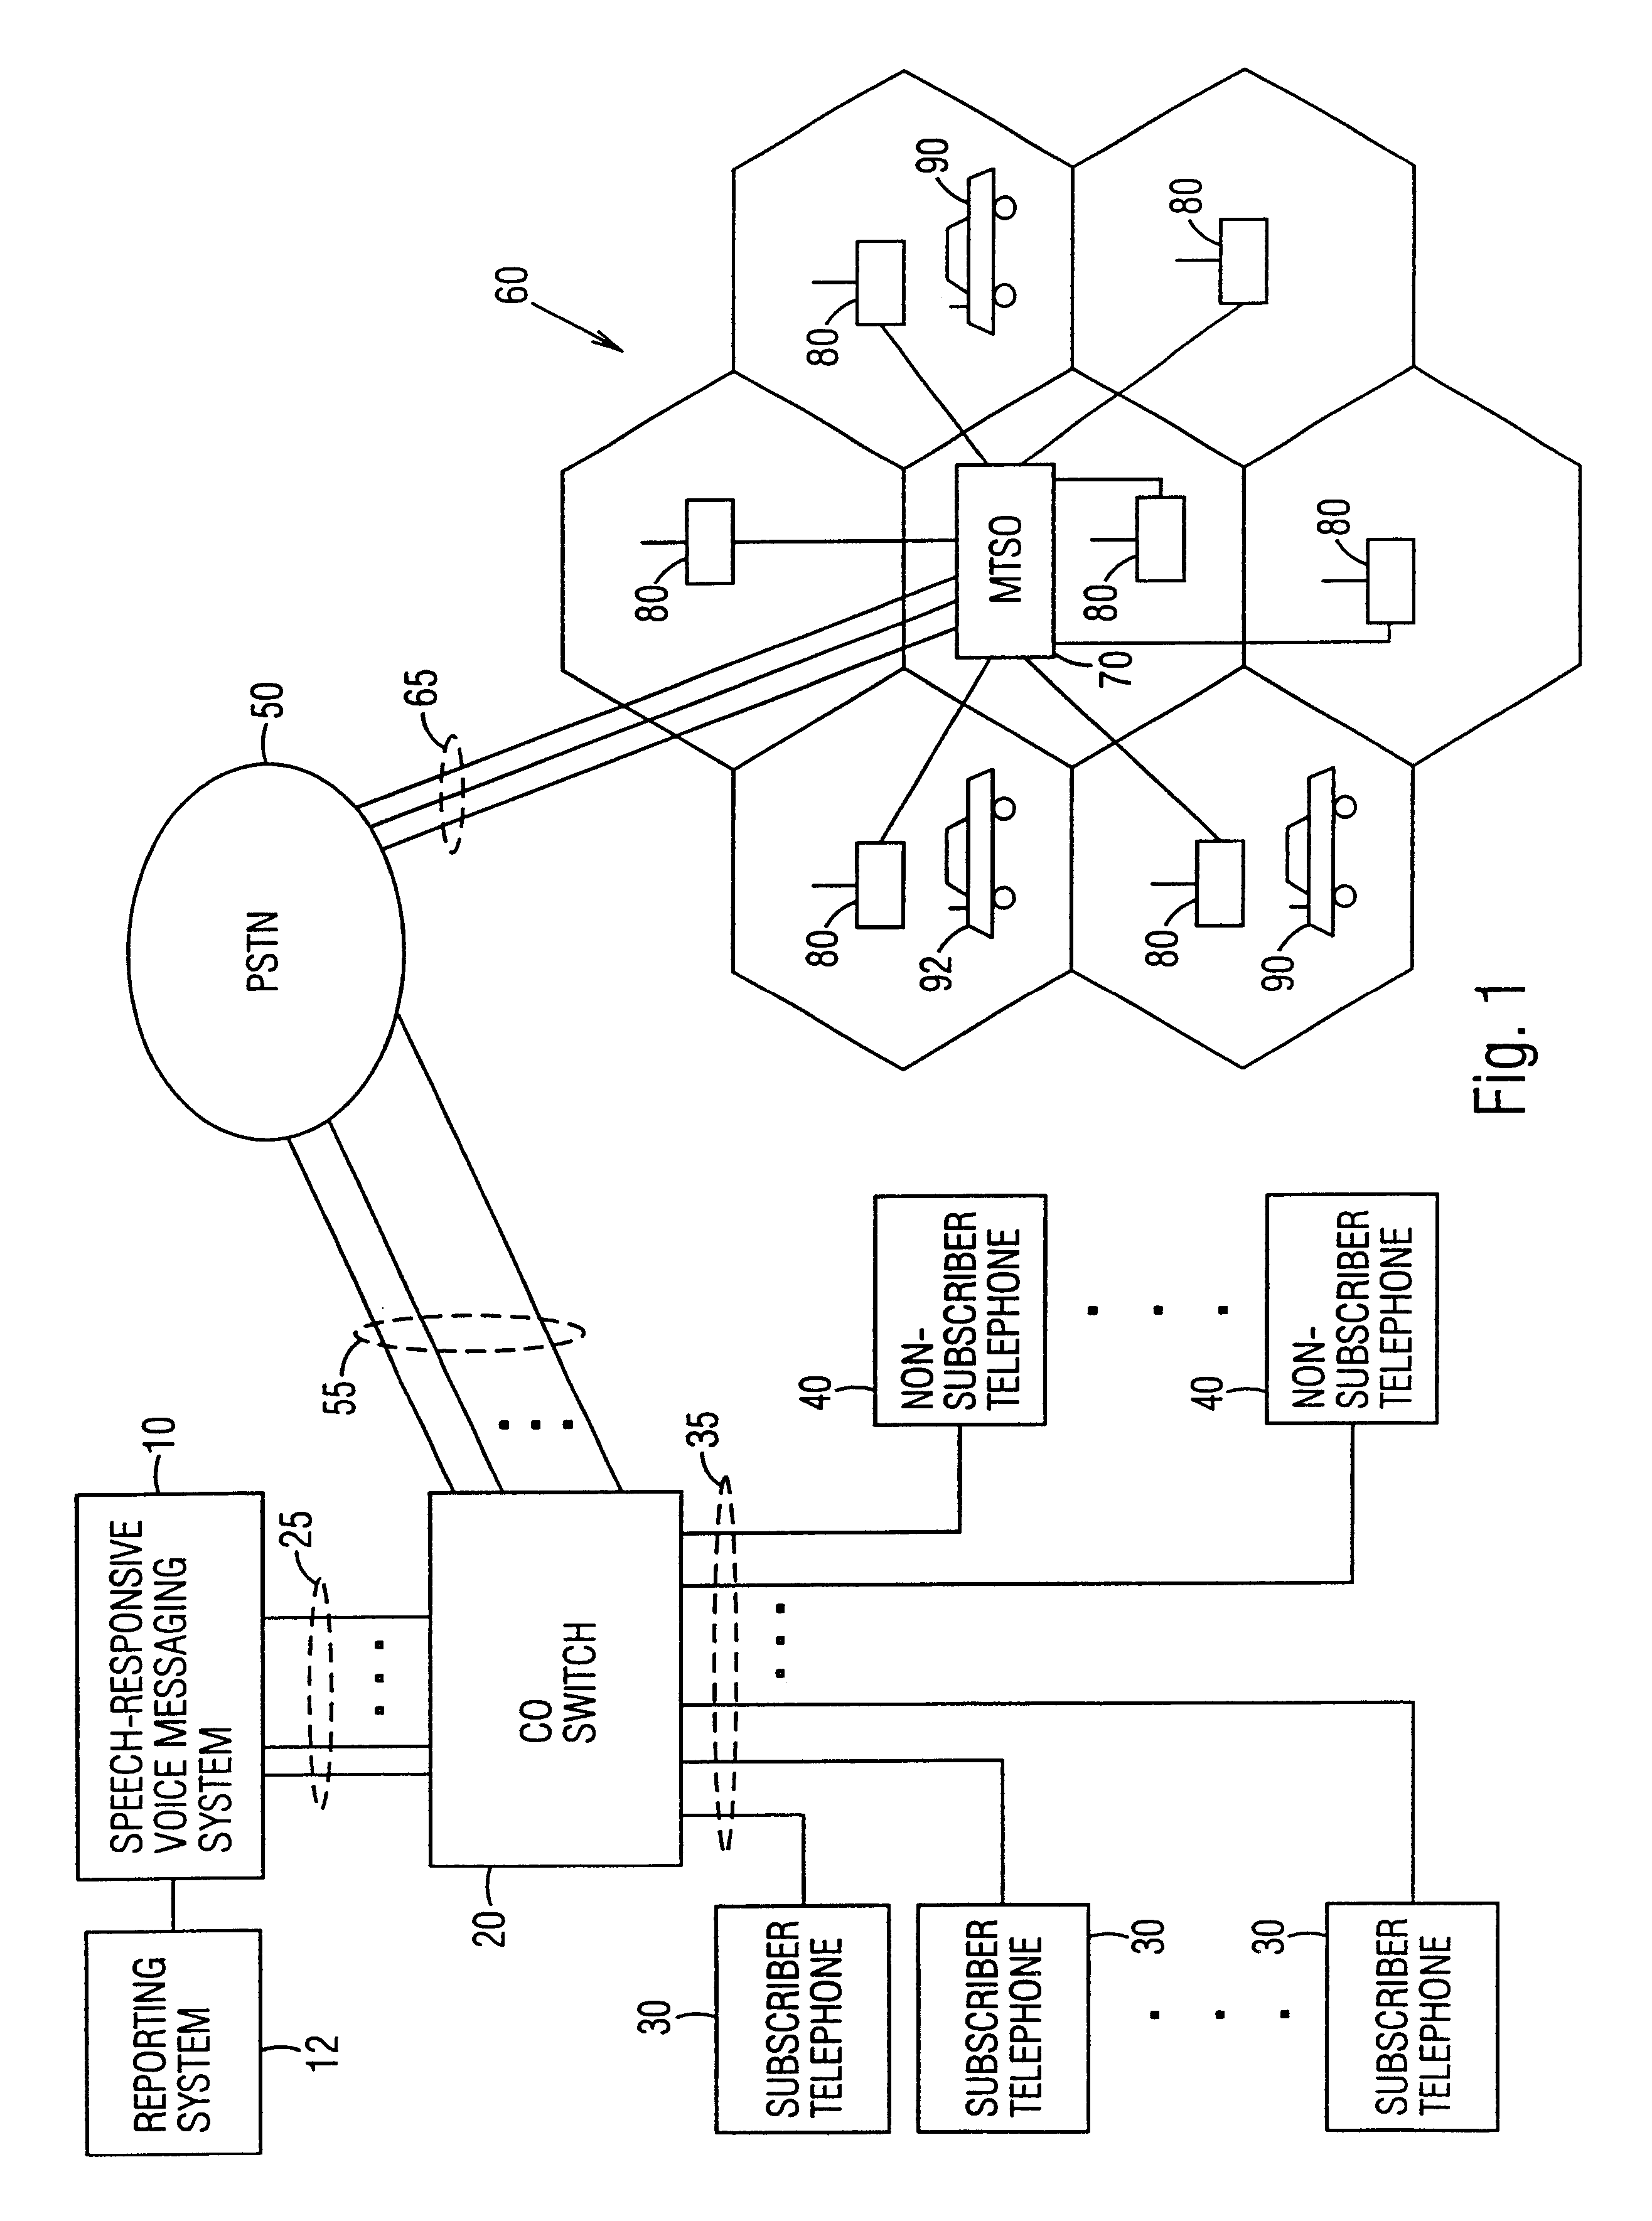 Speech-responsive voice messaging system and method